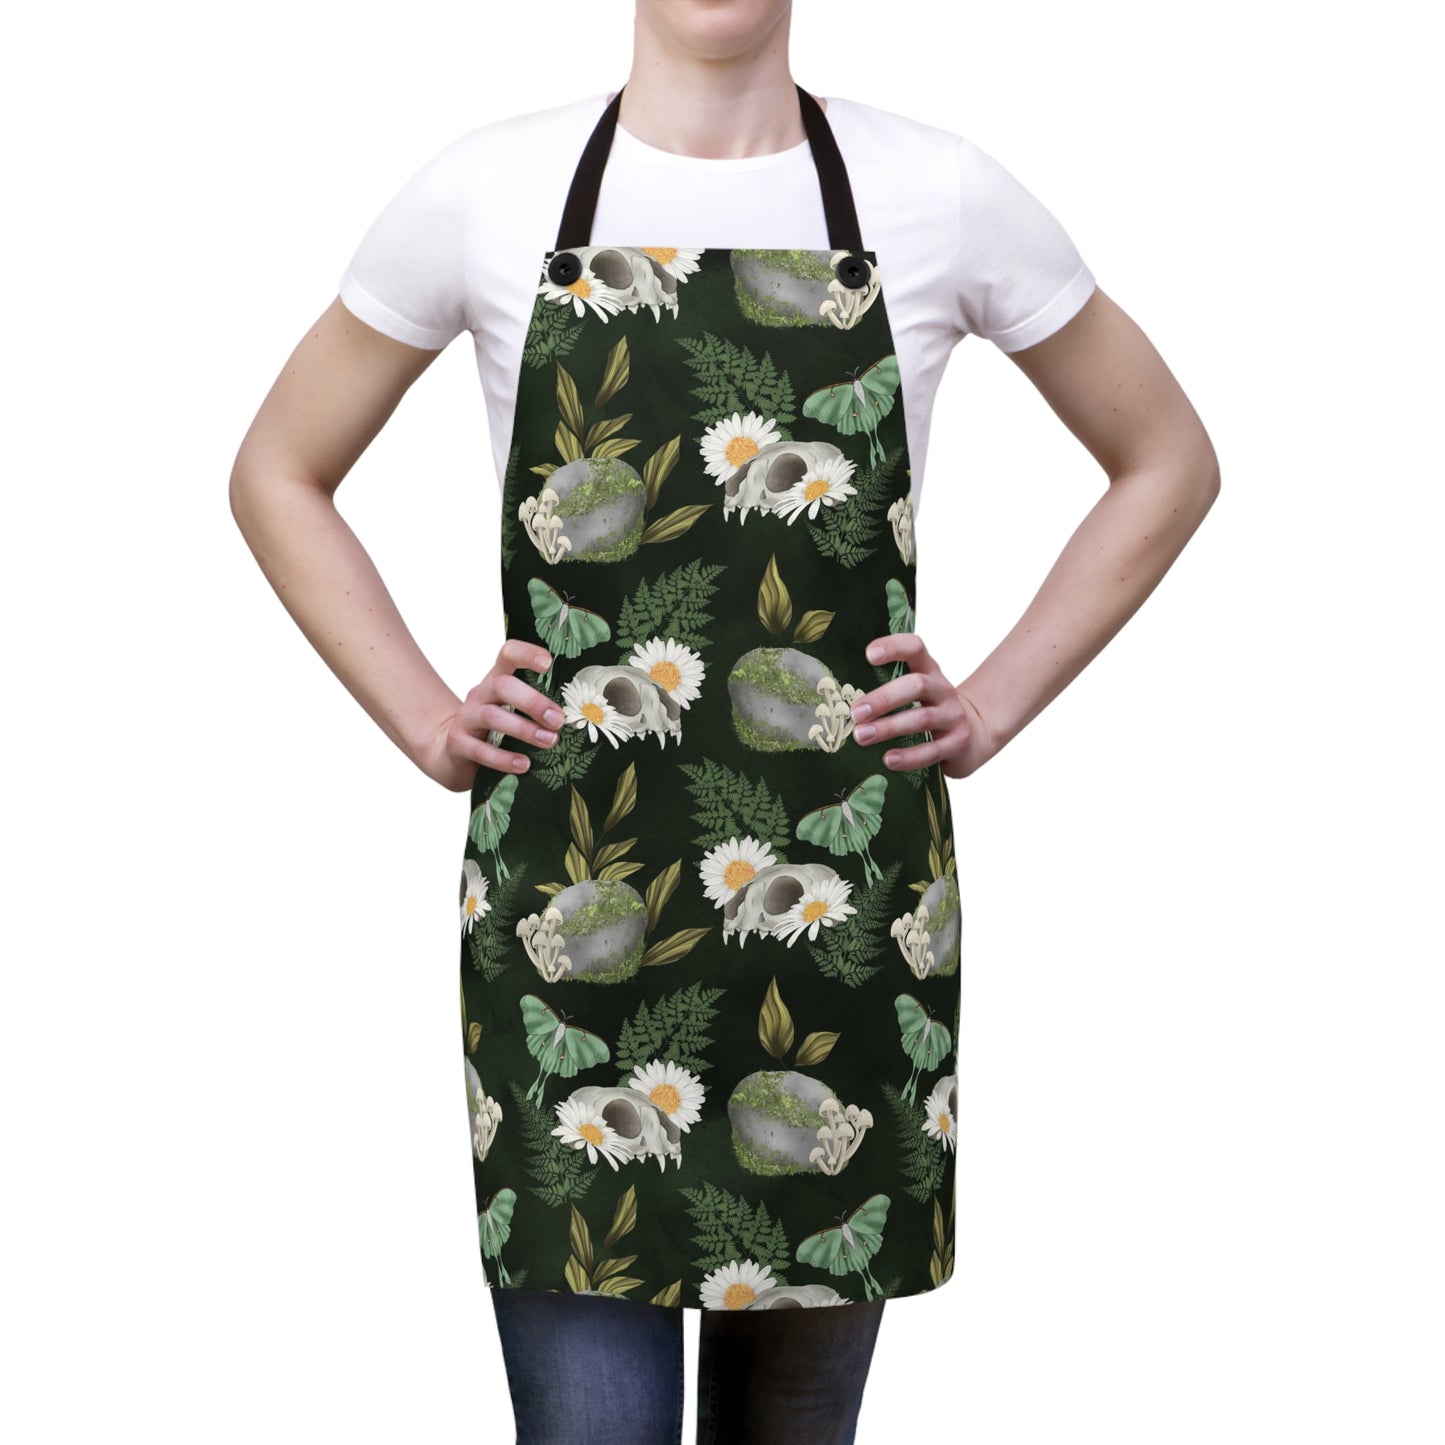 Kitchen Witch Apron - Featuring skulls, moths mushrooms, botanicals, flowers & plants -  One Size - witchy gift, wiccan gift